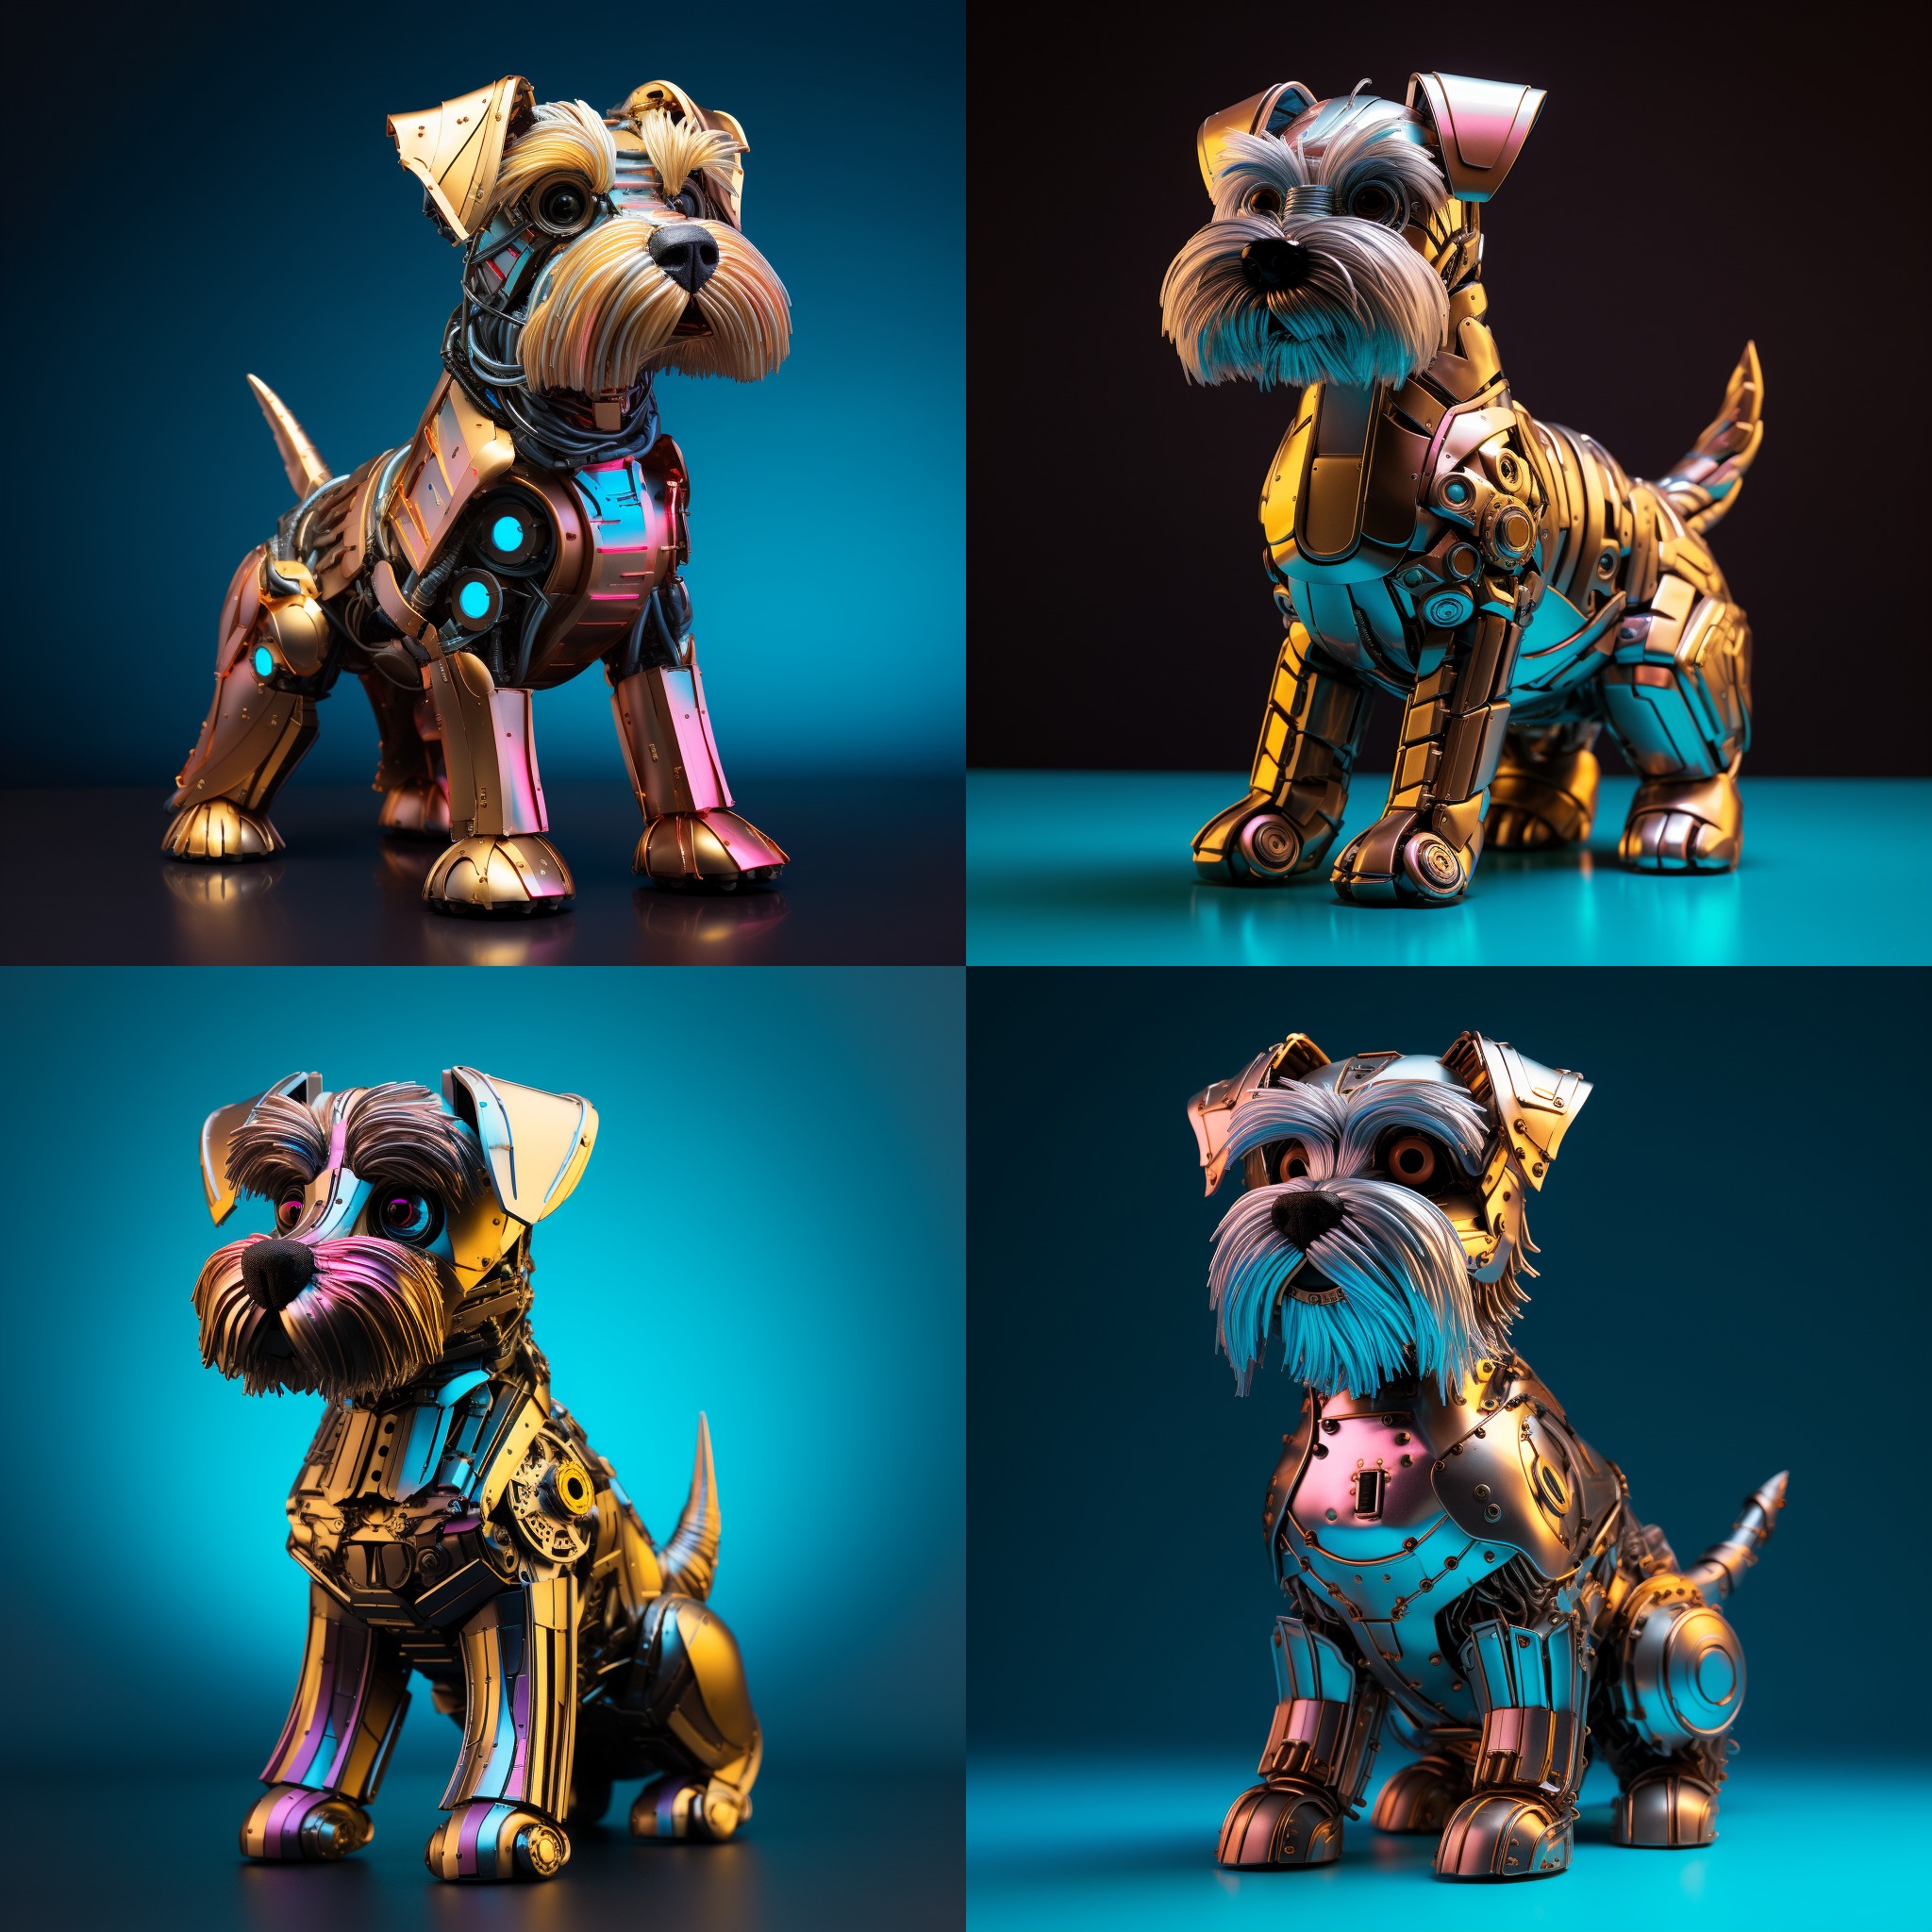 a pixar style retro-futuristic cute golden sculpture of a schnauzer dog looking straight. The backgr